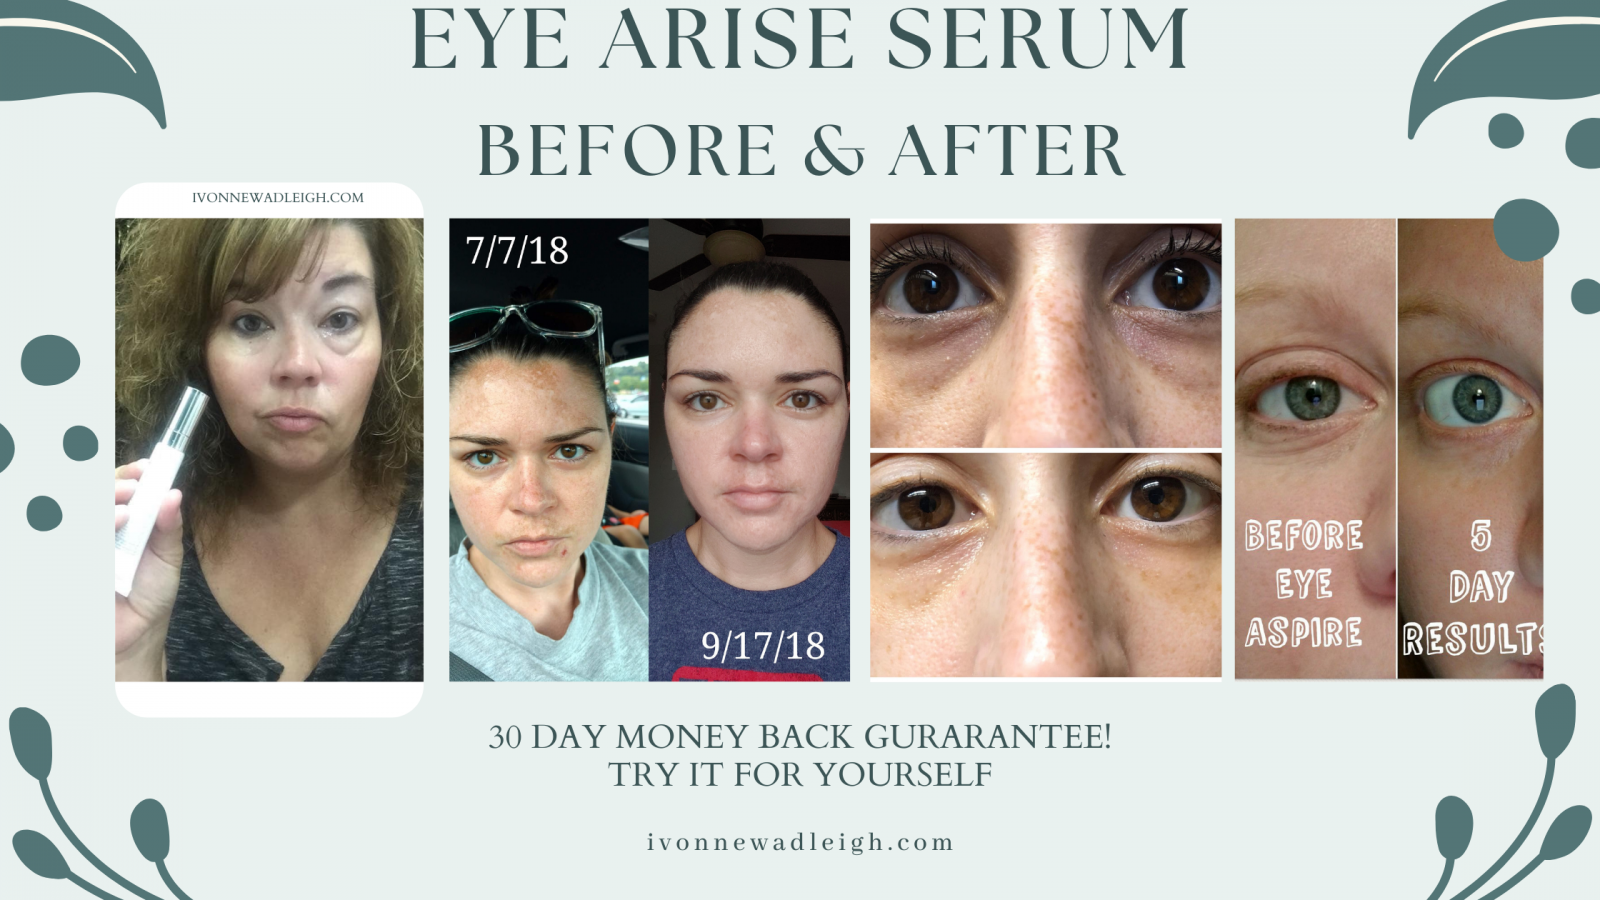 Before and After photos for Eye Arise Serum